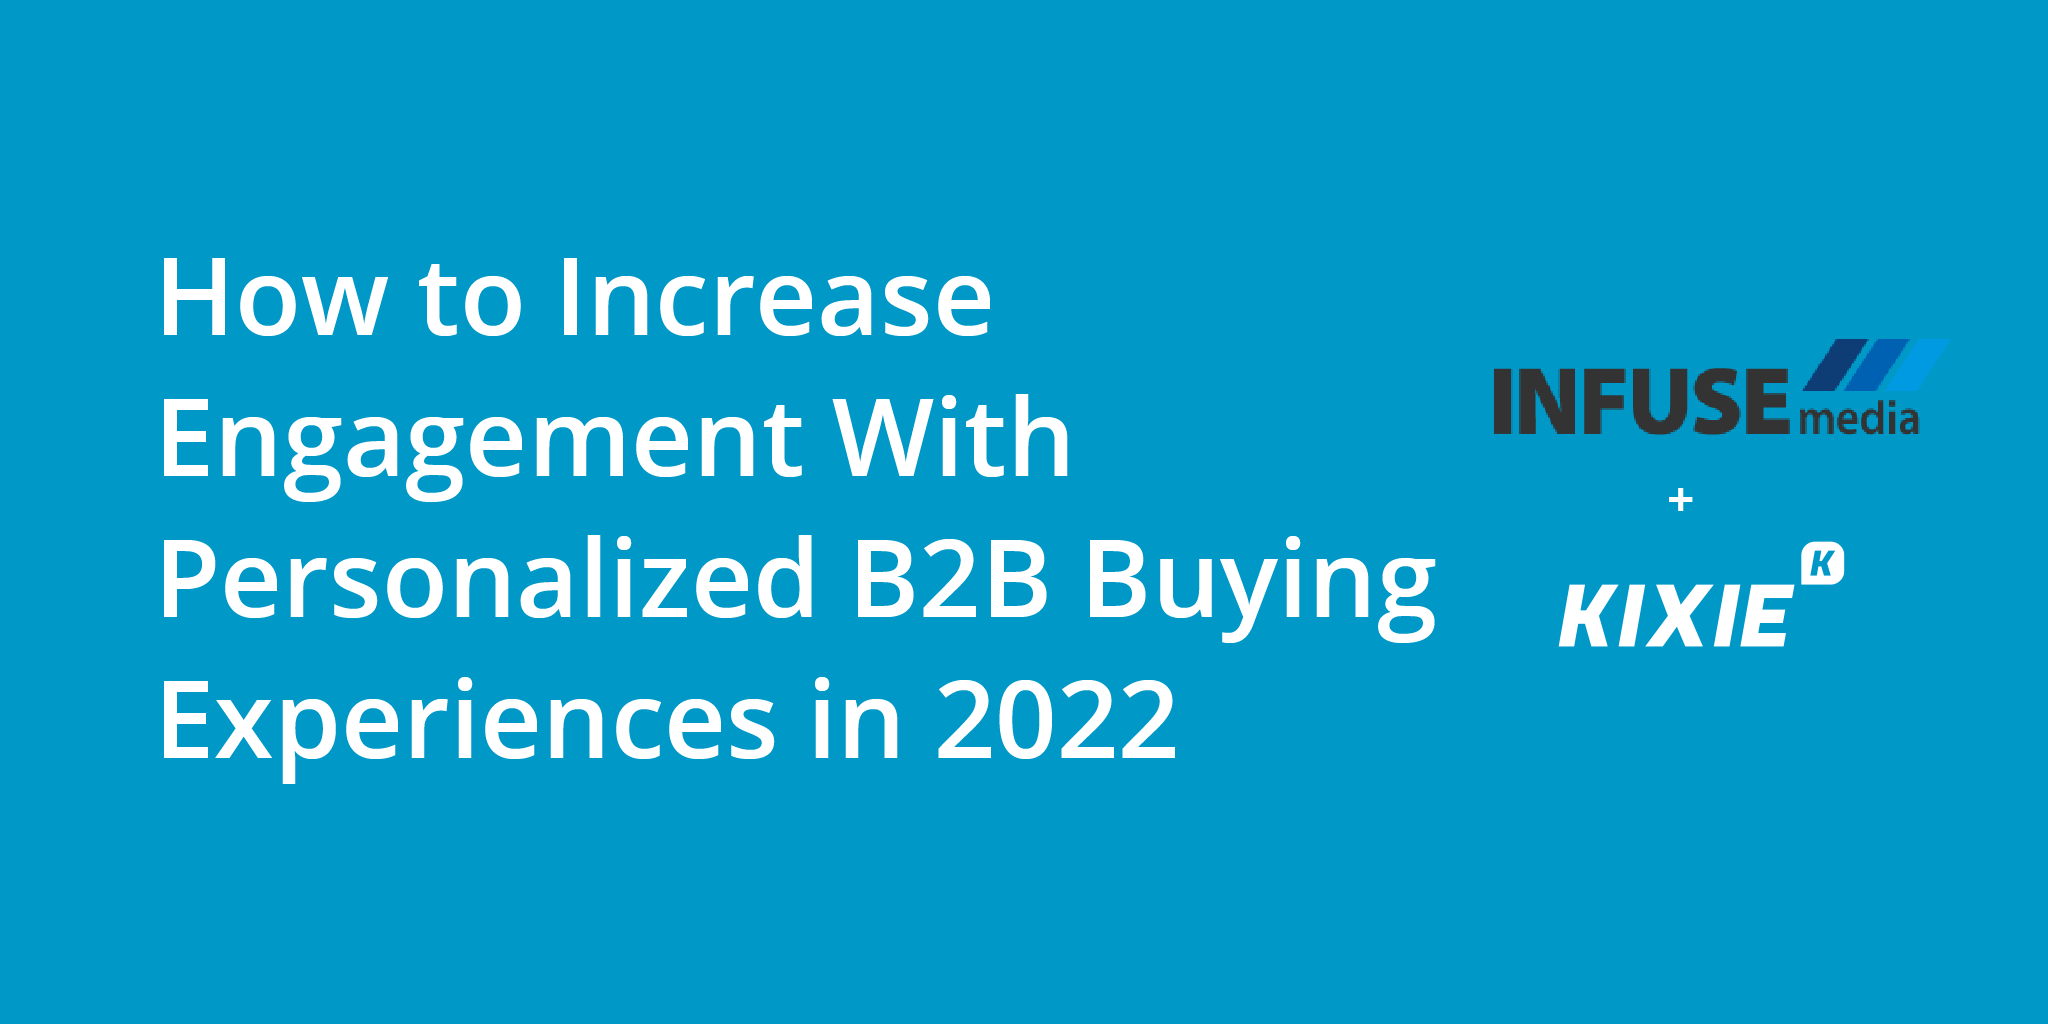 How to Increase Engagement With Personalized B2B Buying Experiences in 2022